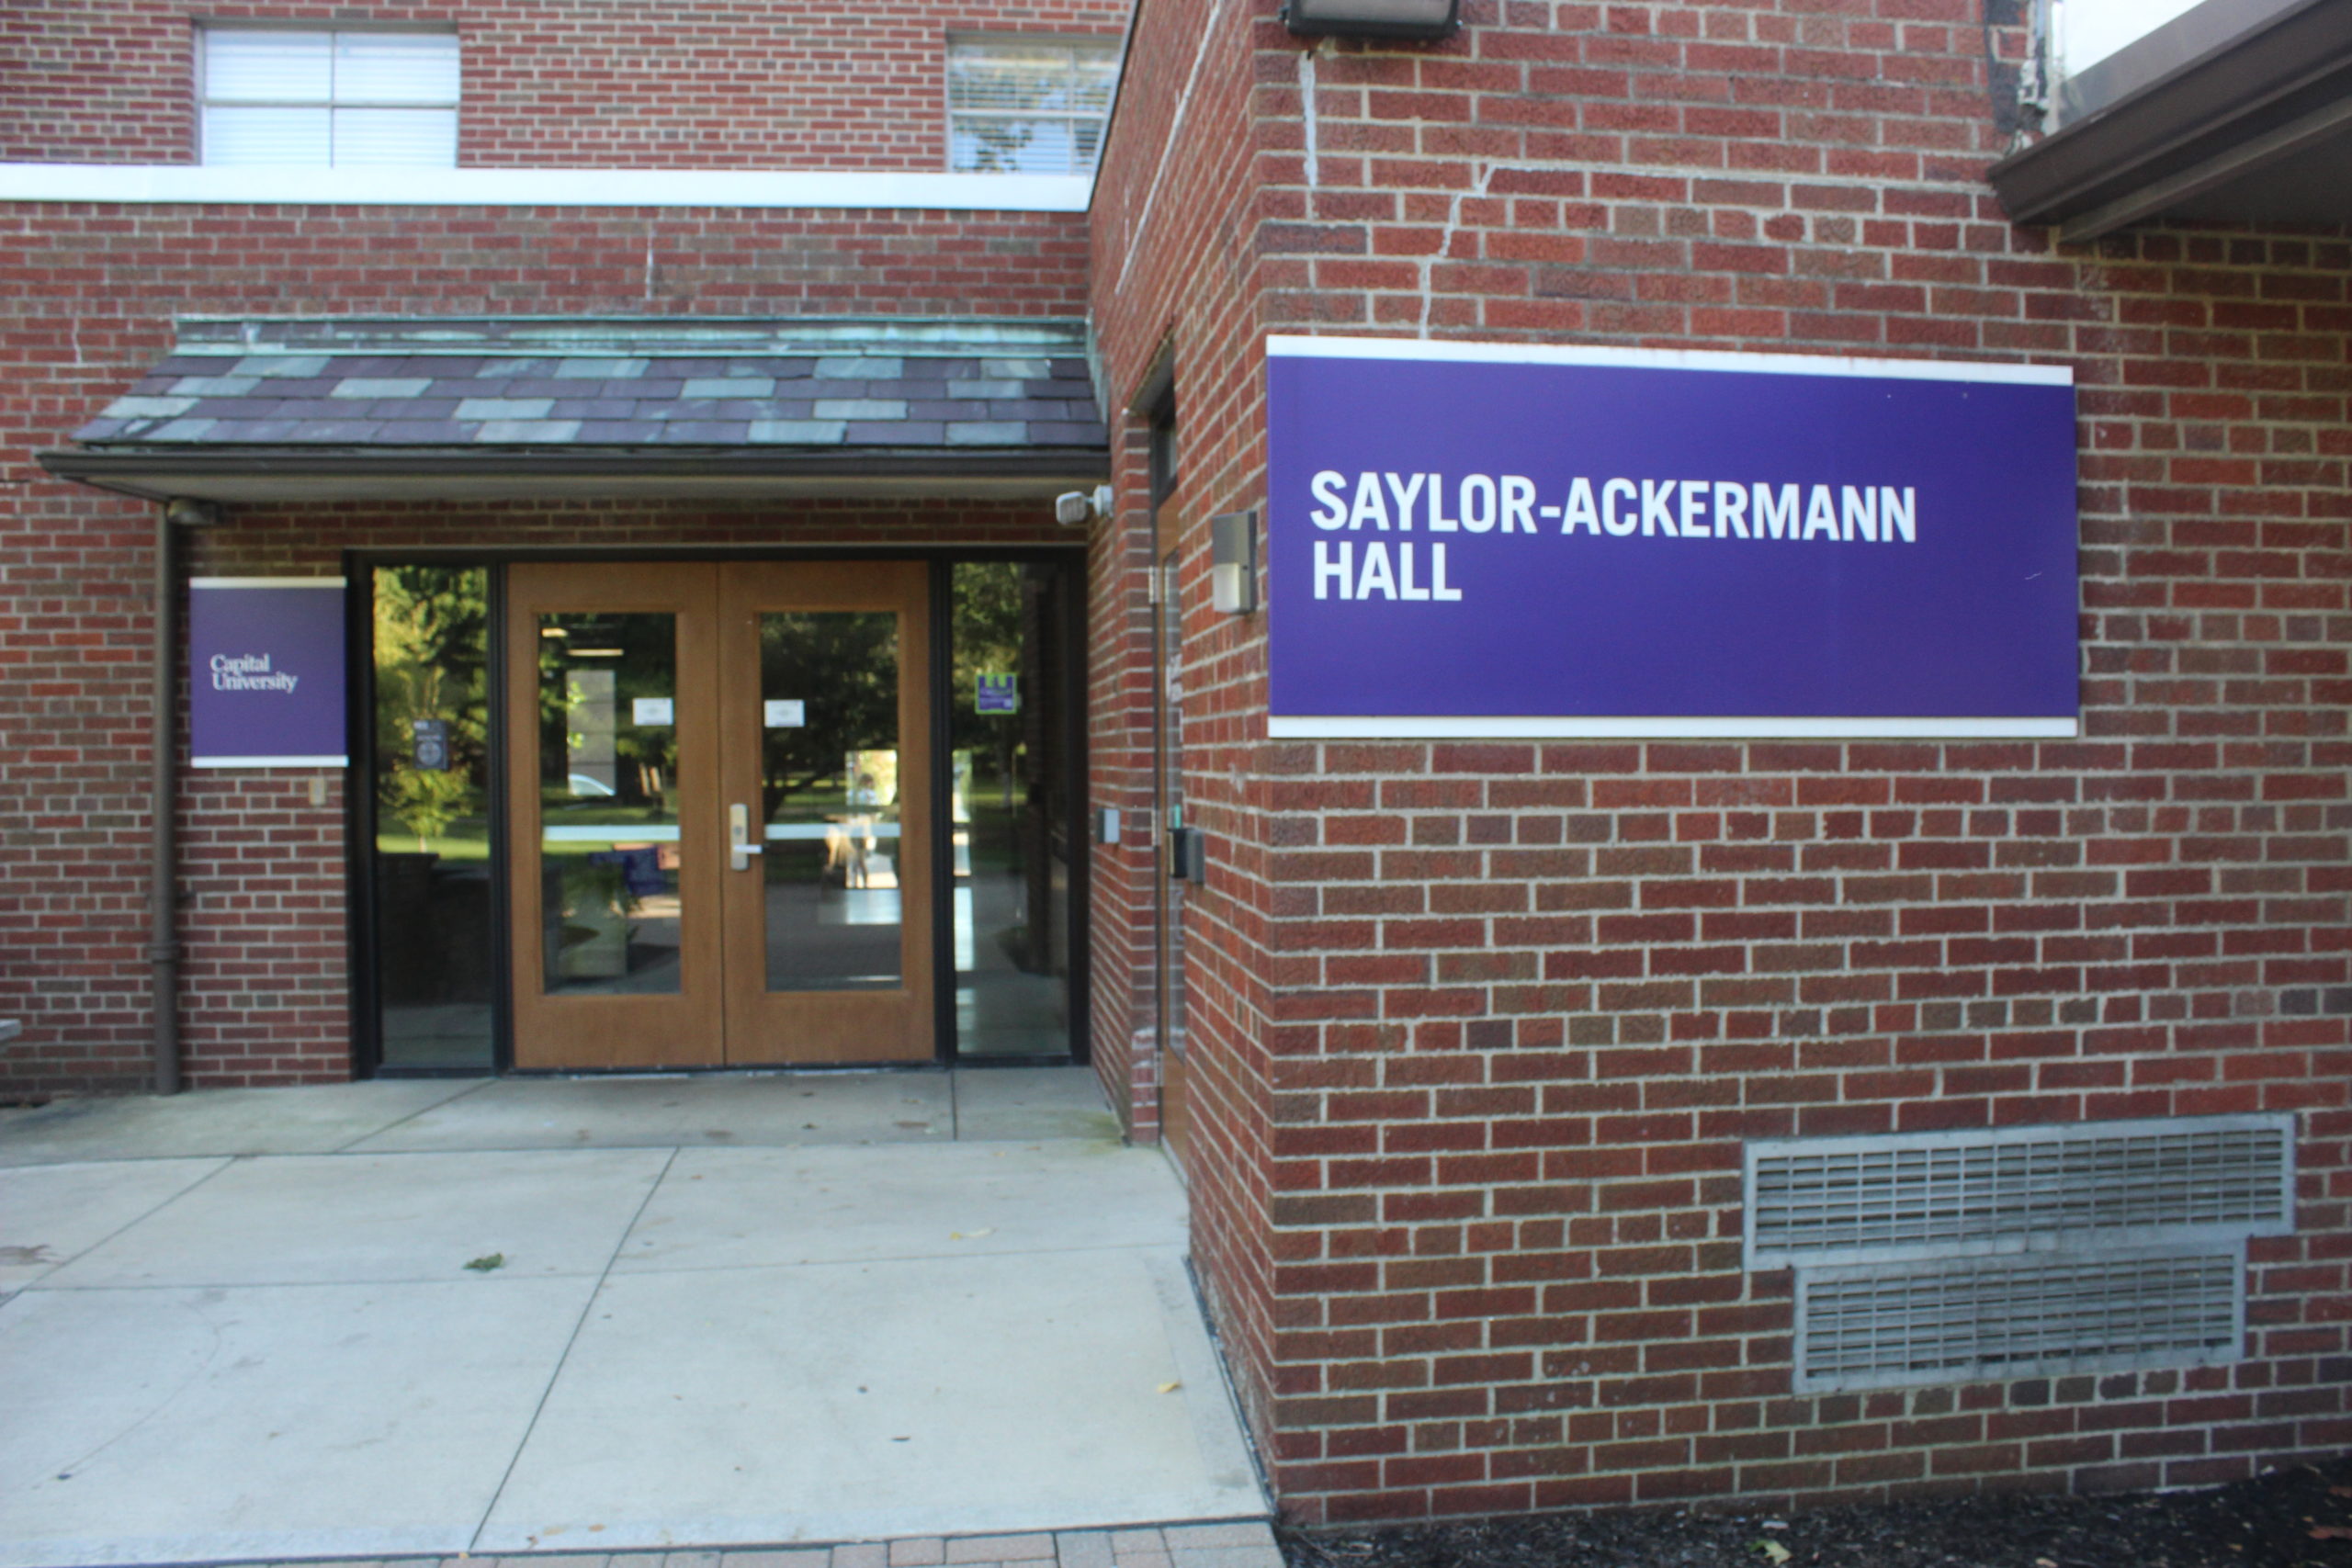 Saylor-Ackermann residents struggle with air conditioning